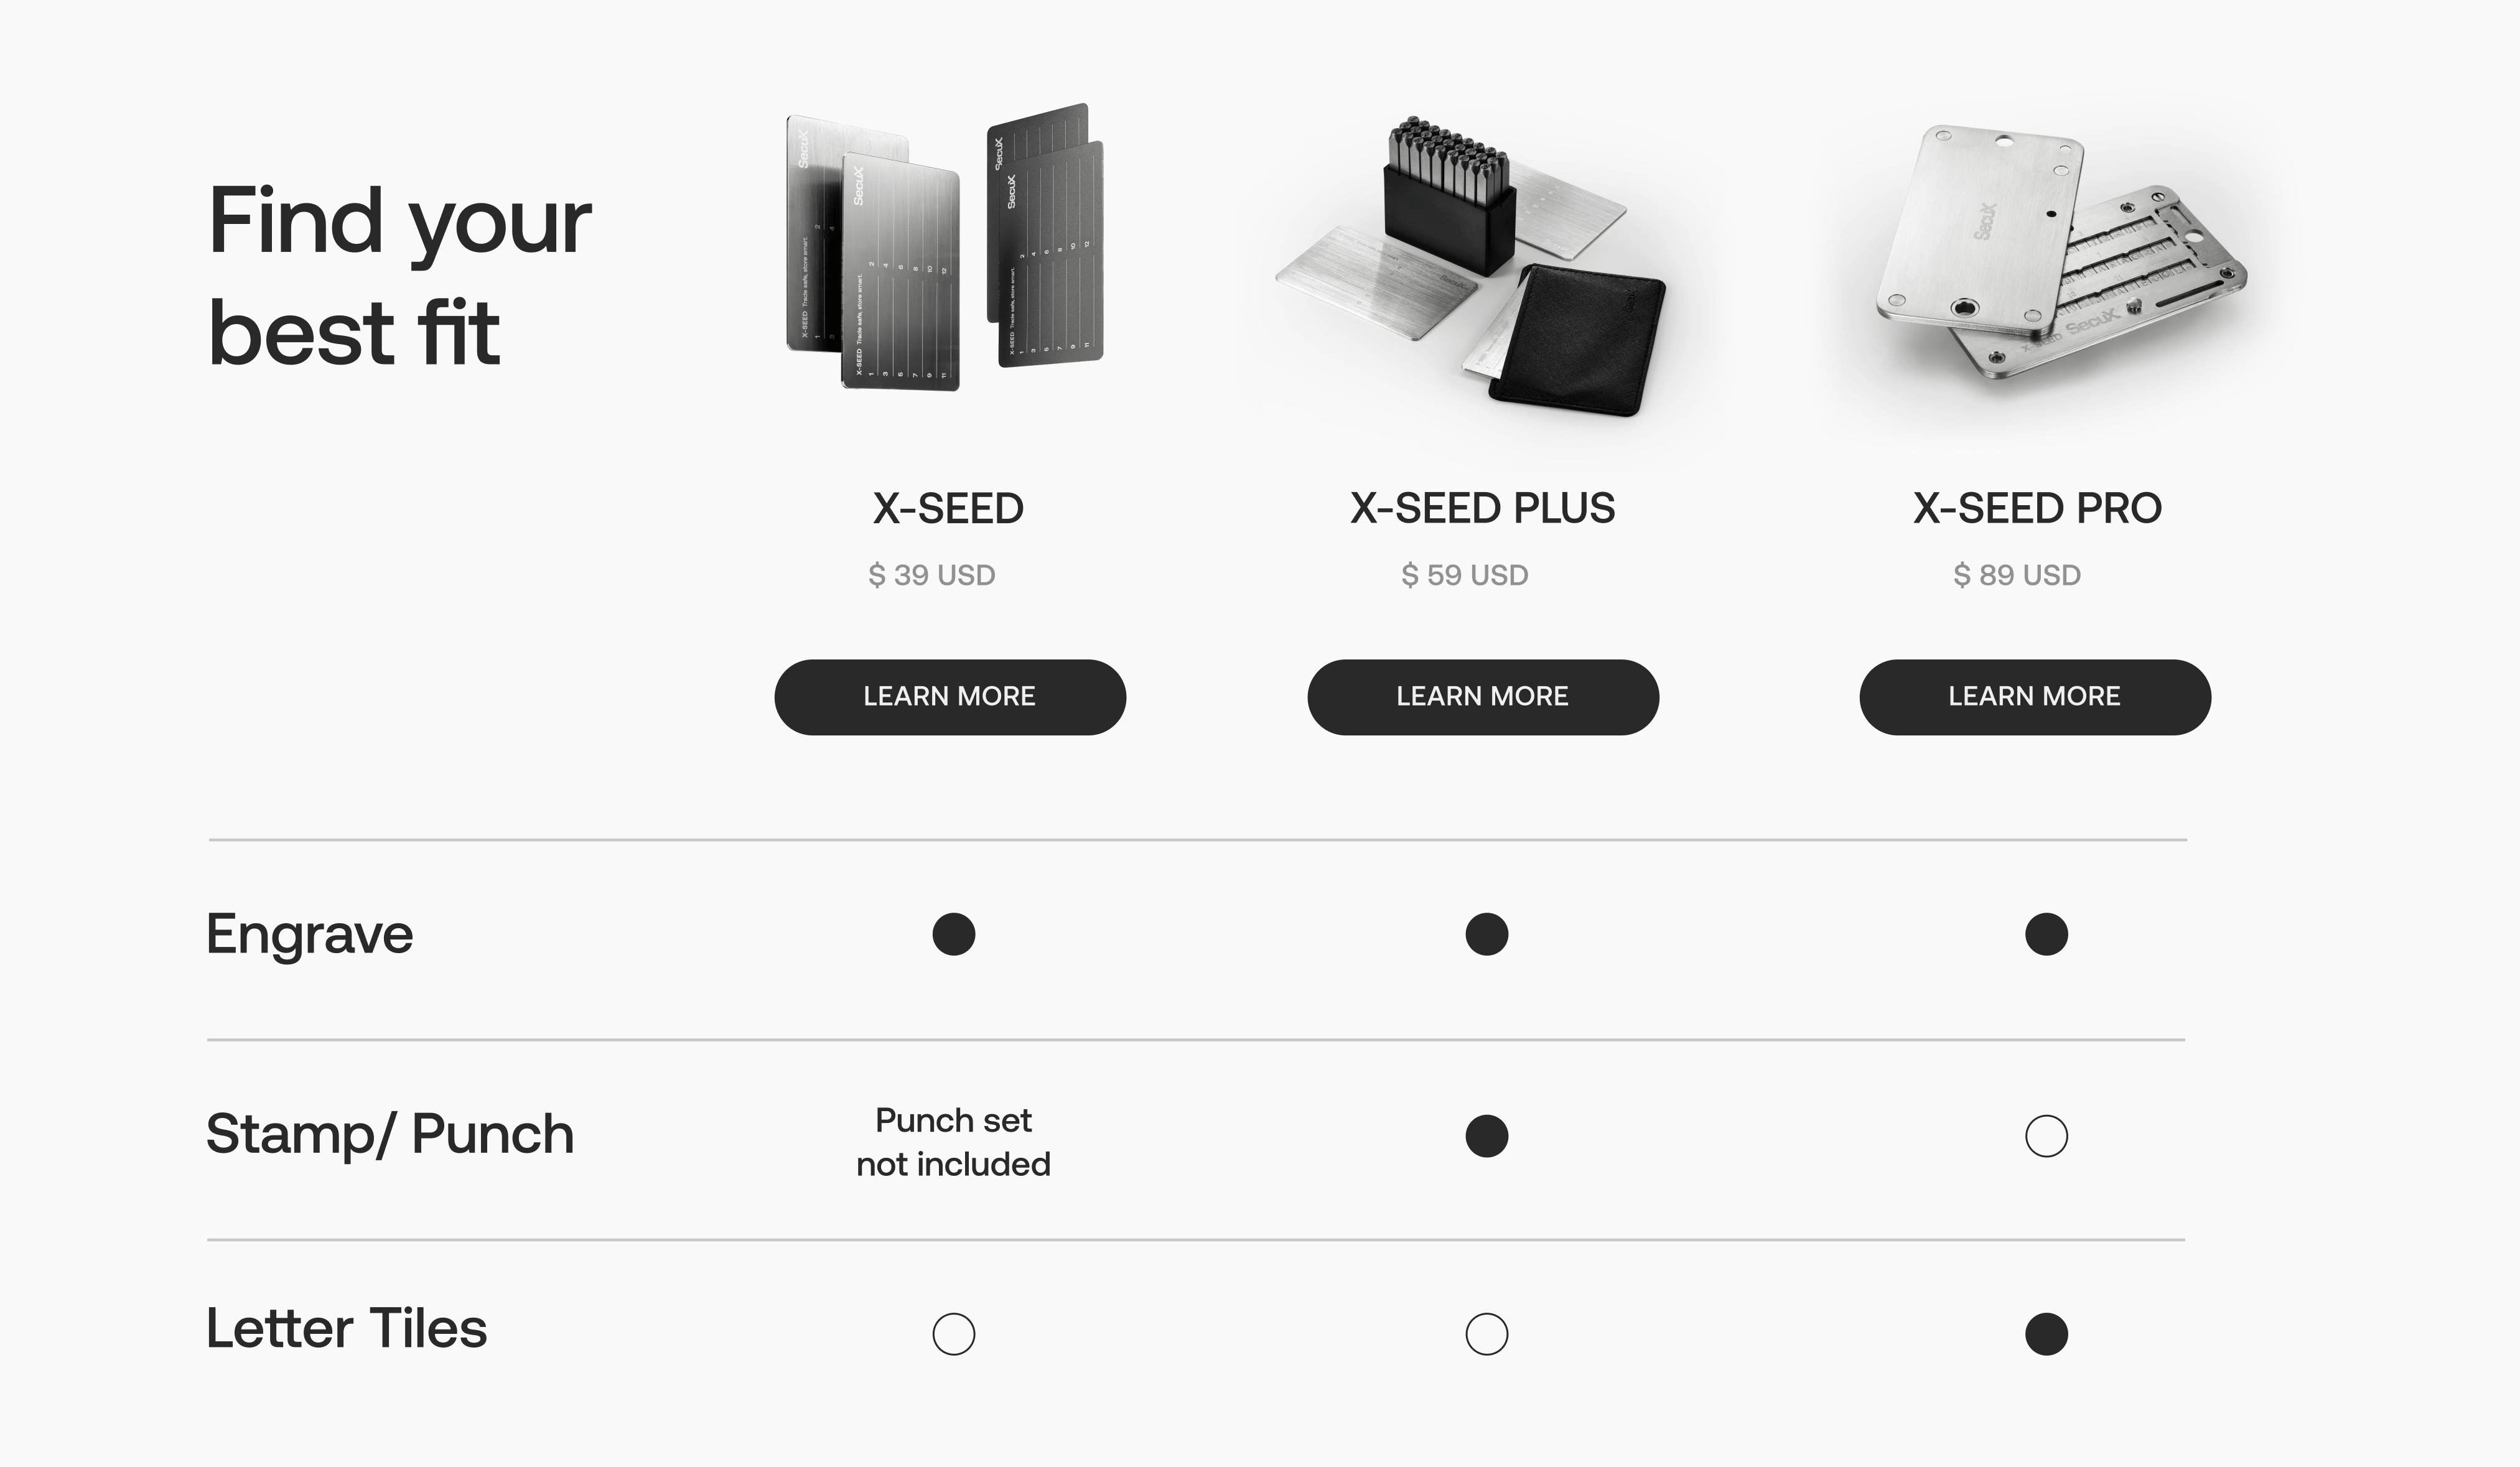 xseed steel crypto wallet specifications 2022